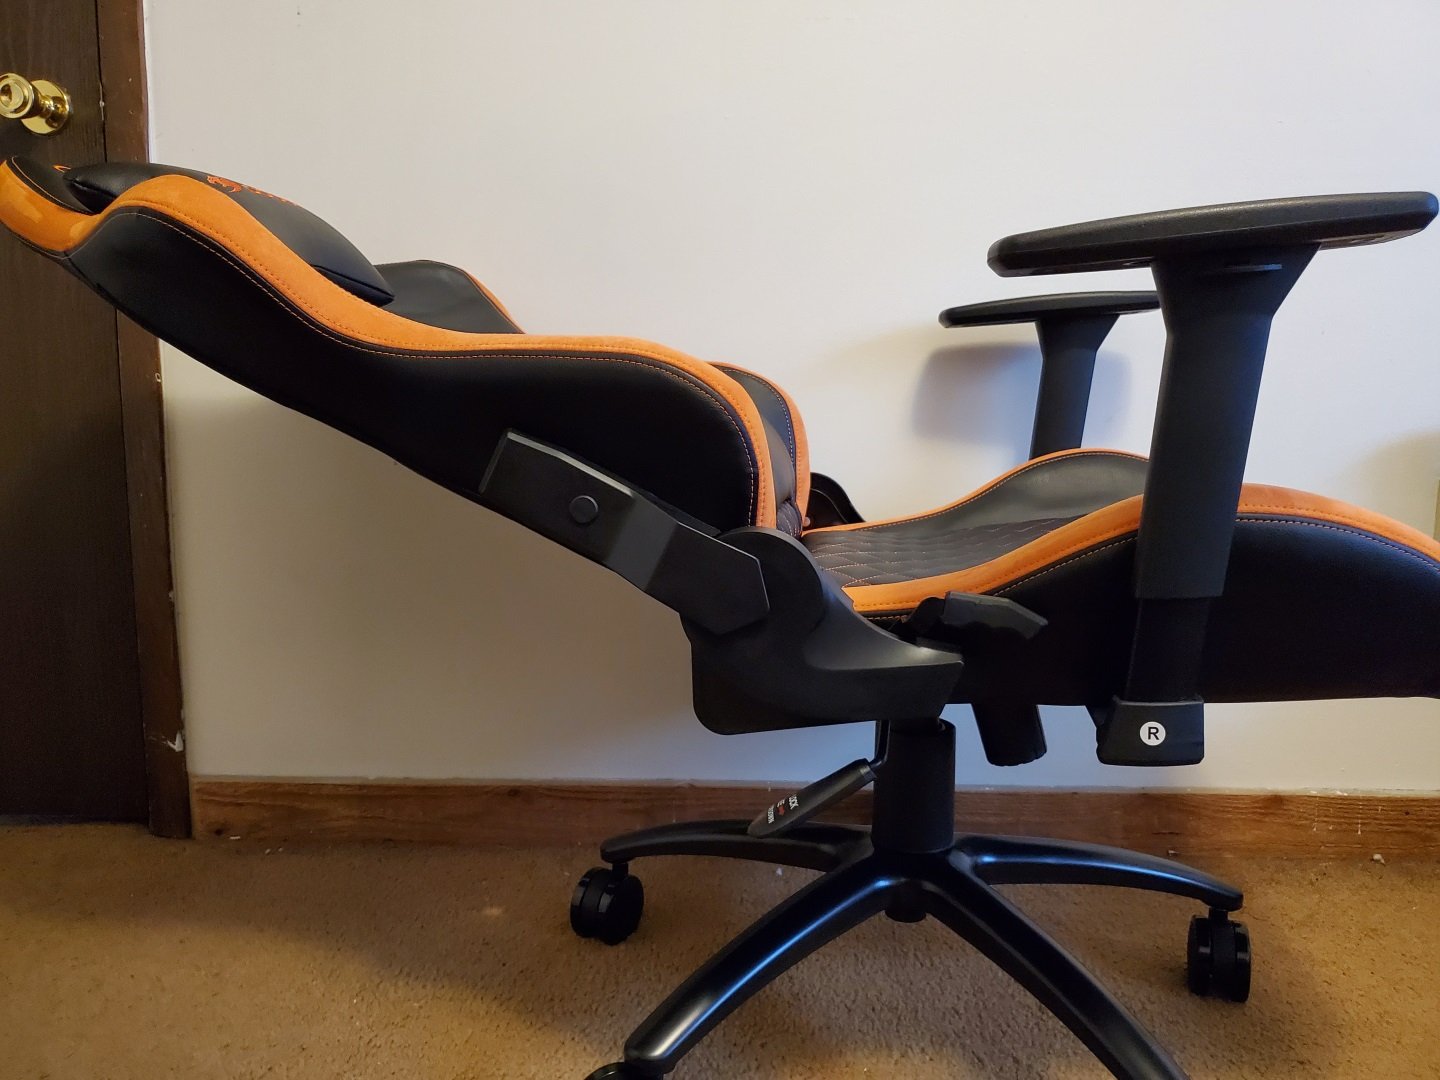 The Perfect Gaming Chair For The Big Boys!!! - Cougar Armor Titan